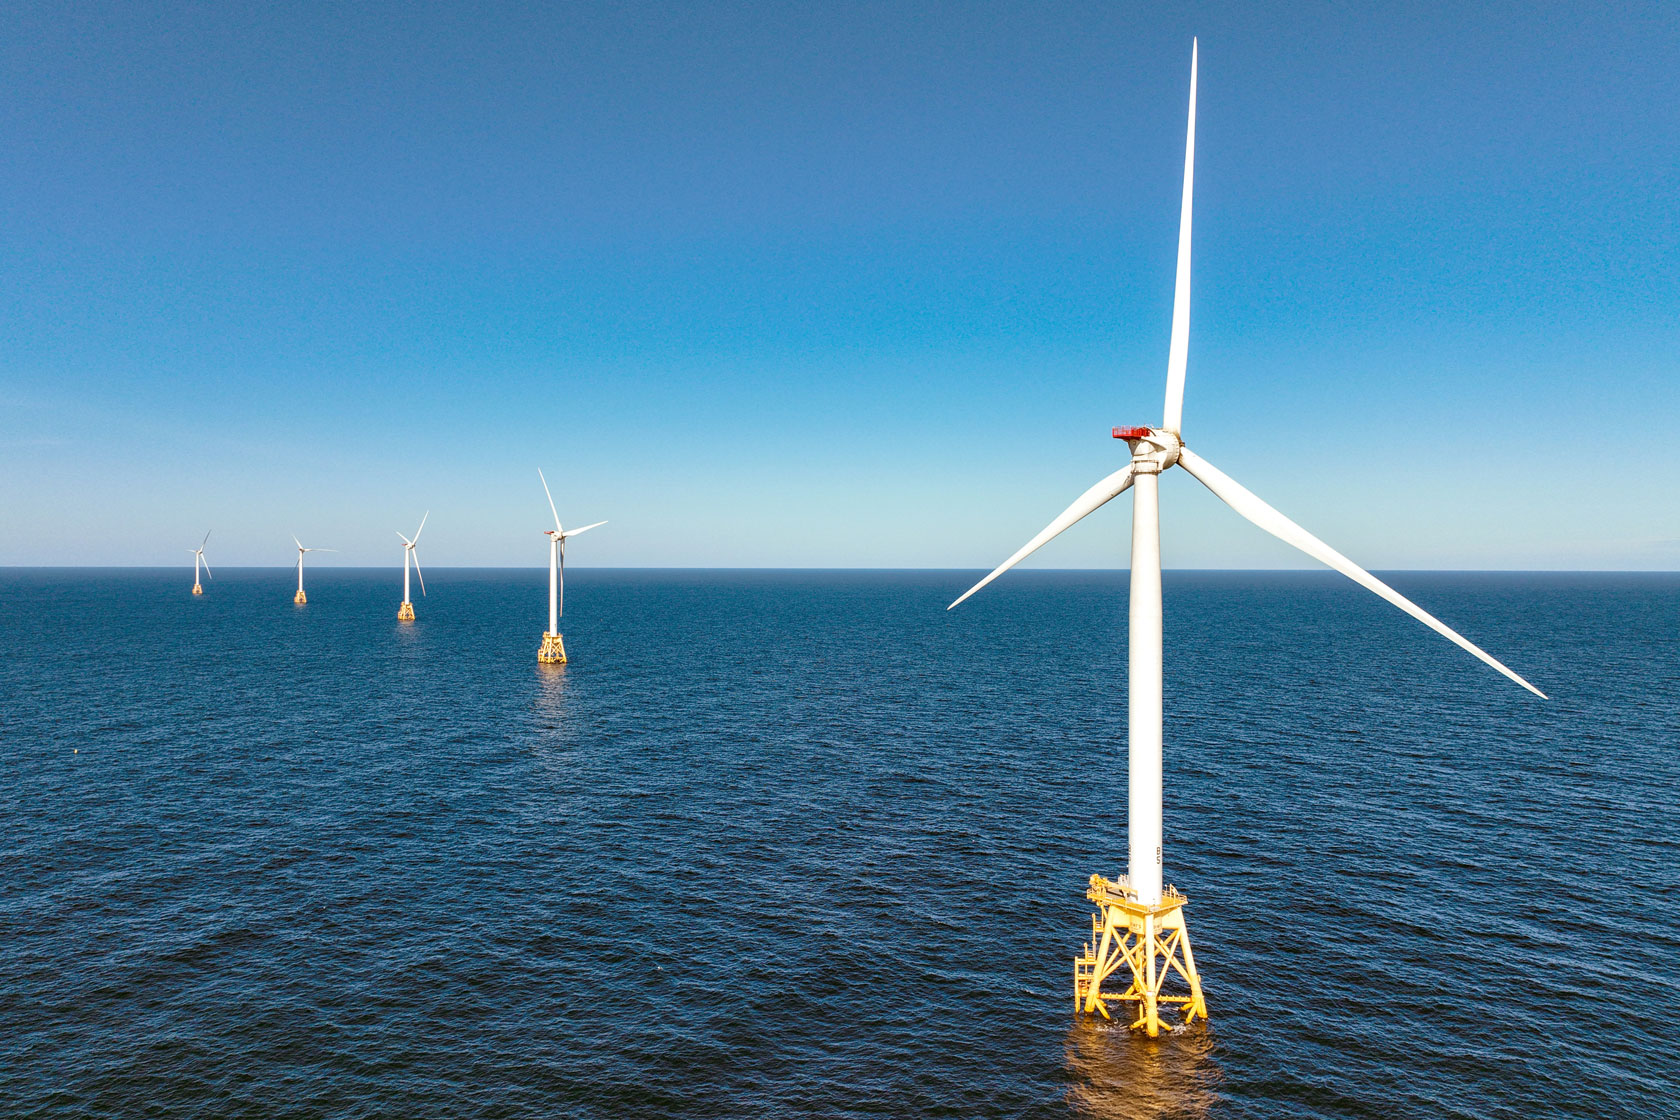 Photo shows a row of five wind turbines sitting in the water on a sunny day.